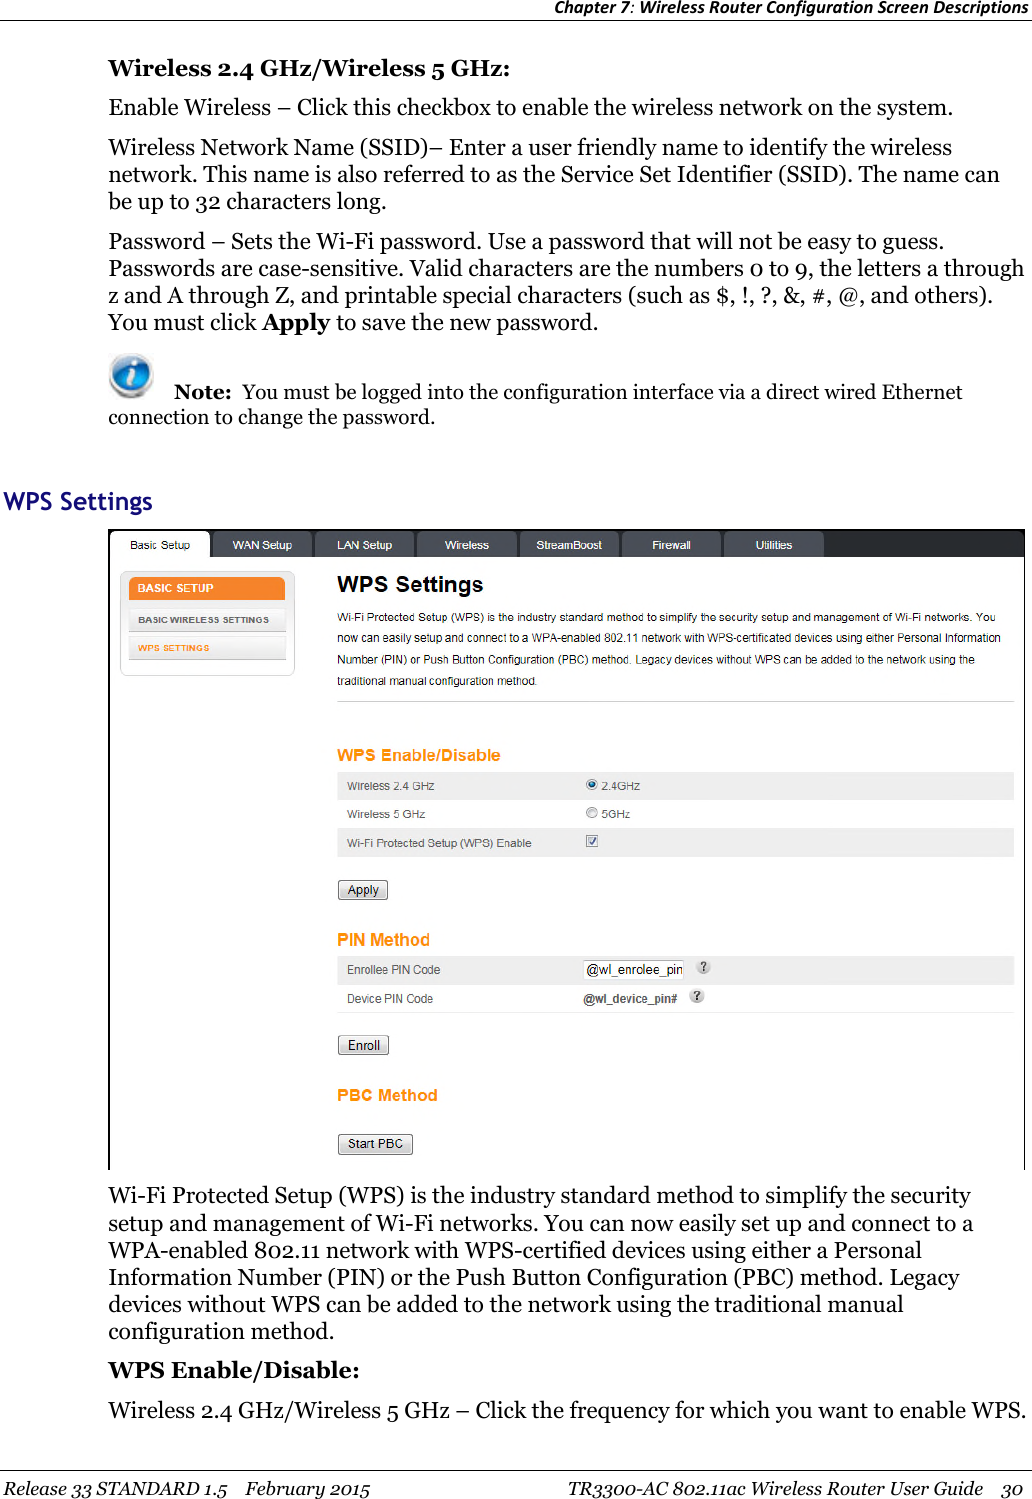 Chapter 7:Wireless Router Configuration Screen DescriptionsRelease 33 STANDARD 1.5 February 2015 TR3300-AC 802.11ac Wireless Router User Guide 30Wireless 2.4 GHz/Wireless 5 GHz:Enable Wireless – Click this checkbox to enable the wireless network on the system.Wireless Network Name (SSID)– Enter a user friendly name to identify the wirelessnetwork. This name is also referred to as the Service Set Identifier (SSID). The name canbe up to 32 characters long.Password – Sets the Wi-Fi password. Use a password that will not be easy to guess.Passwords are case-sensitive. Valid characters are the numbers 0 to 9, the letters a throughz and A through Z, and printable special characters (such as $, !, ?, &amp;, #, @, and others).You must click Apply to save the new password.Note: You must be logged into the configuration interface via a direct wired Ethernetconnection to change the password.WPS SettingsWi-Fi Protected Setup (WPS) is the industry standard method to simplify the securitysetup and management of Wi-Fi networks. You can now easily set up and connect to aWPA-enabled 802.11 network with WPS-certified devices using either a PersonalInformation Number (PIN) or the Push Button Configuration (PBC) method. Legacydevices without WPS can be added to the network using the traditional manualconfiguration method.WPS Enable/Disable:Wireless 2.4 GHz/Wireless 5 GHz – Click the frequency for which you want to enable WPS.